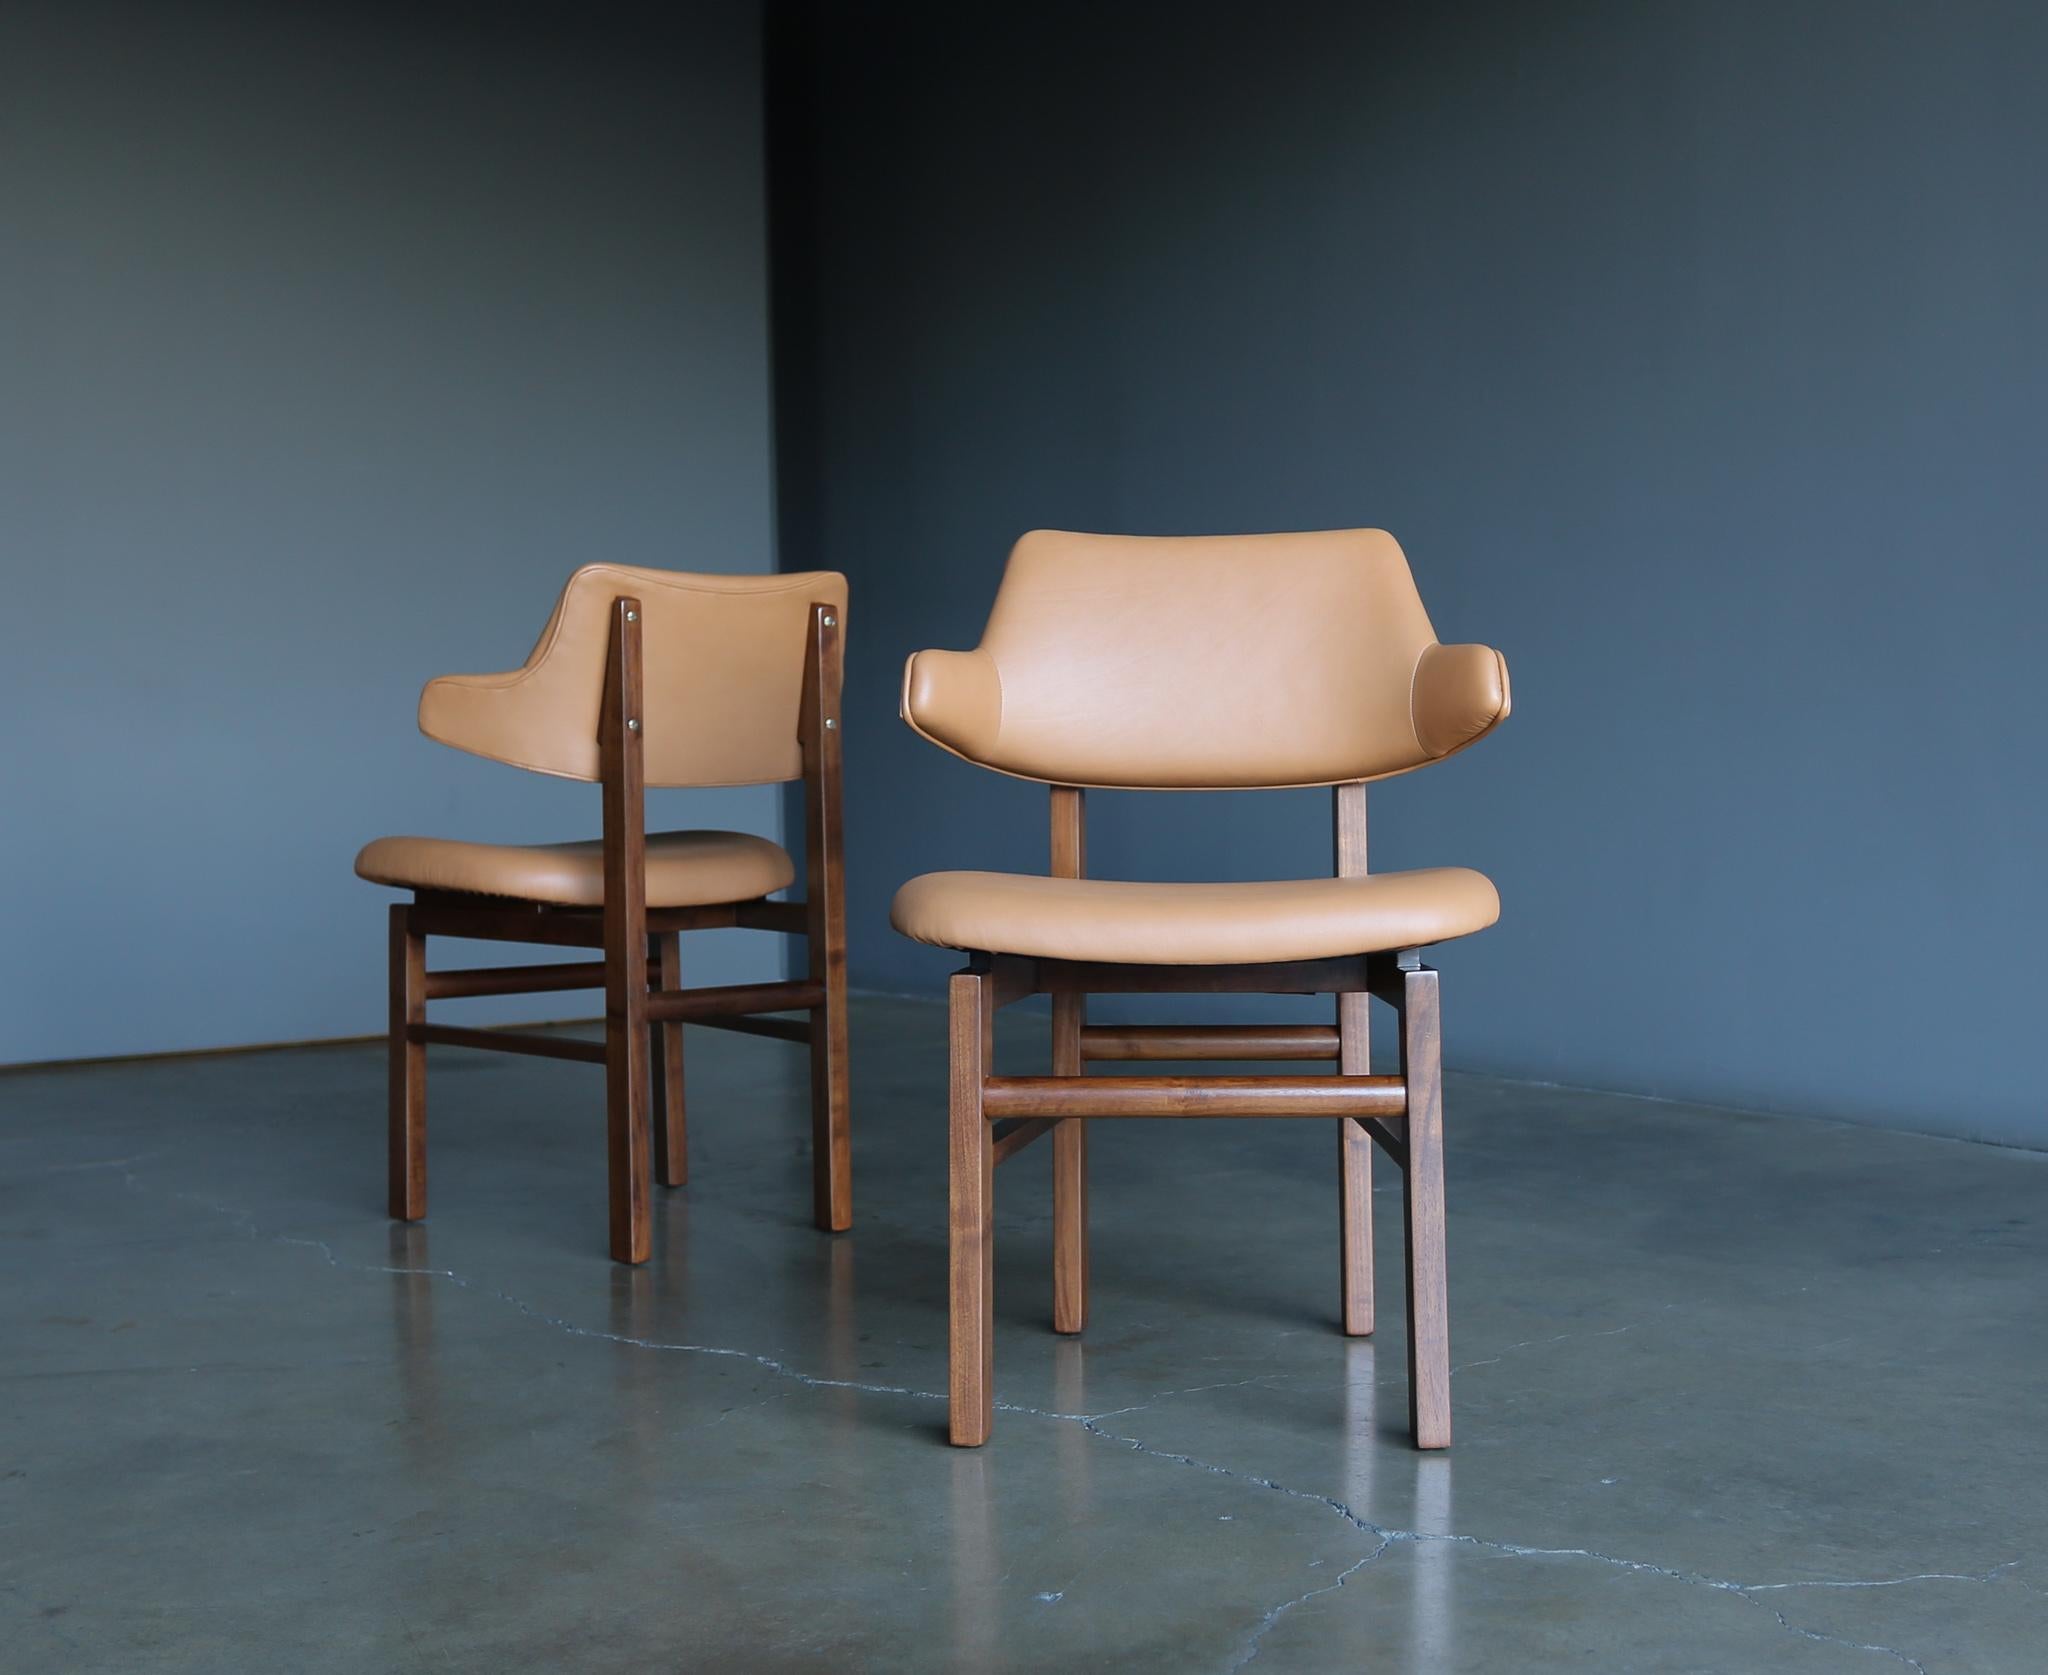 20th Century Edward Wormley Walnut and Leather Model 675 Dining Chairs for Dunbar, circa 1955